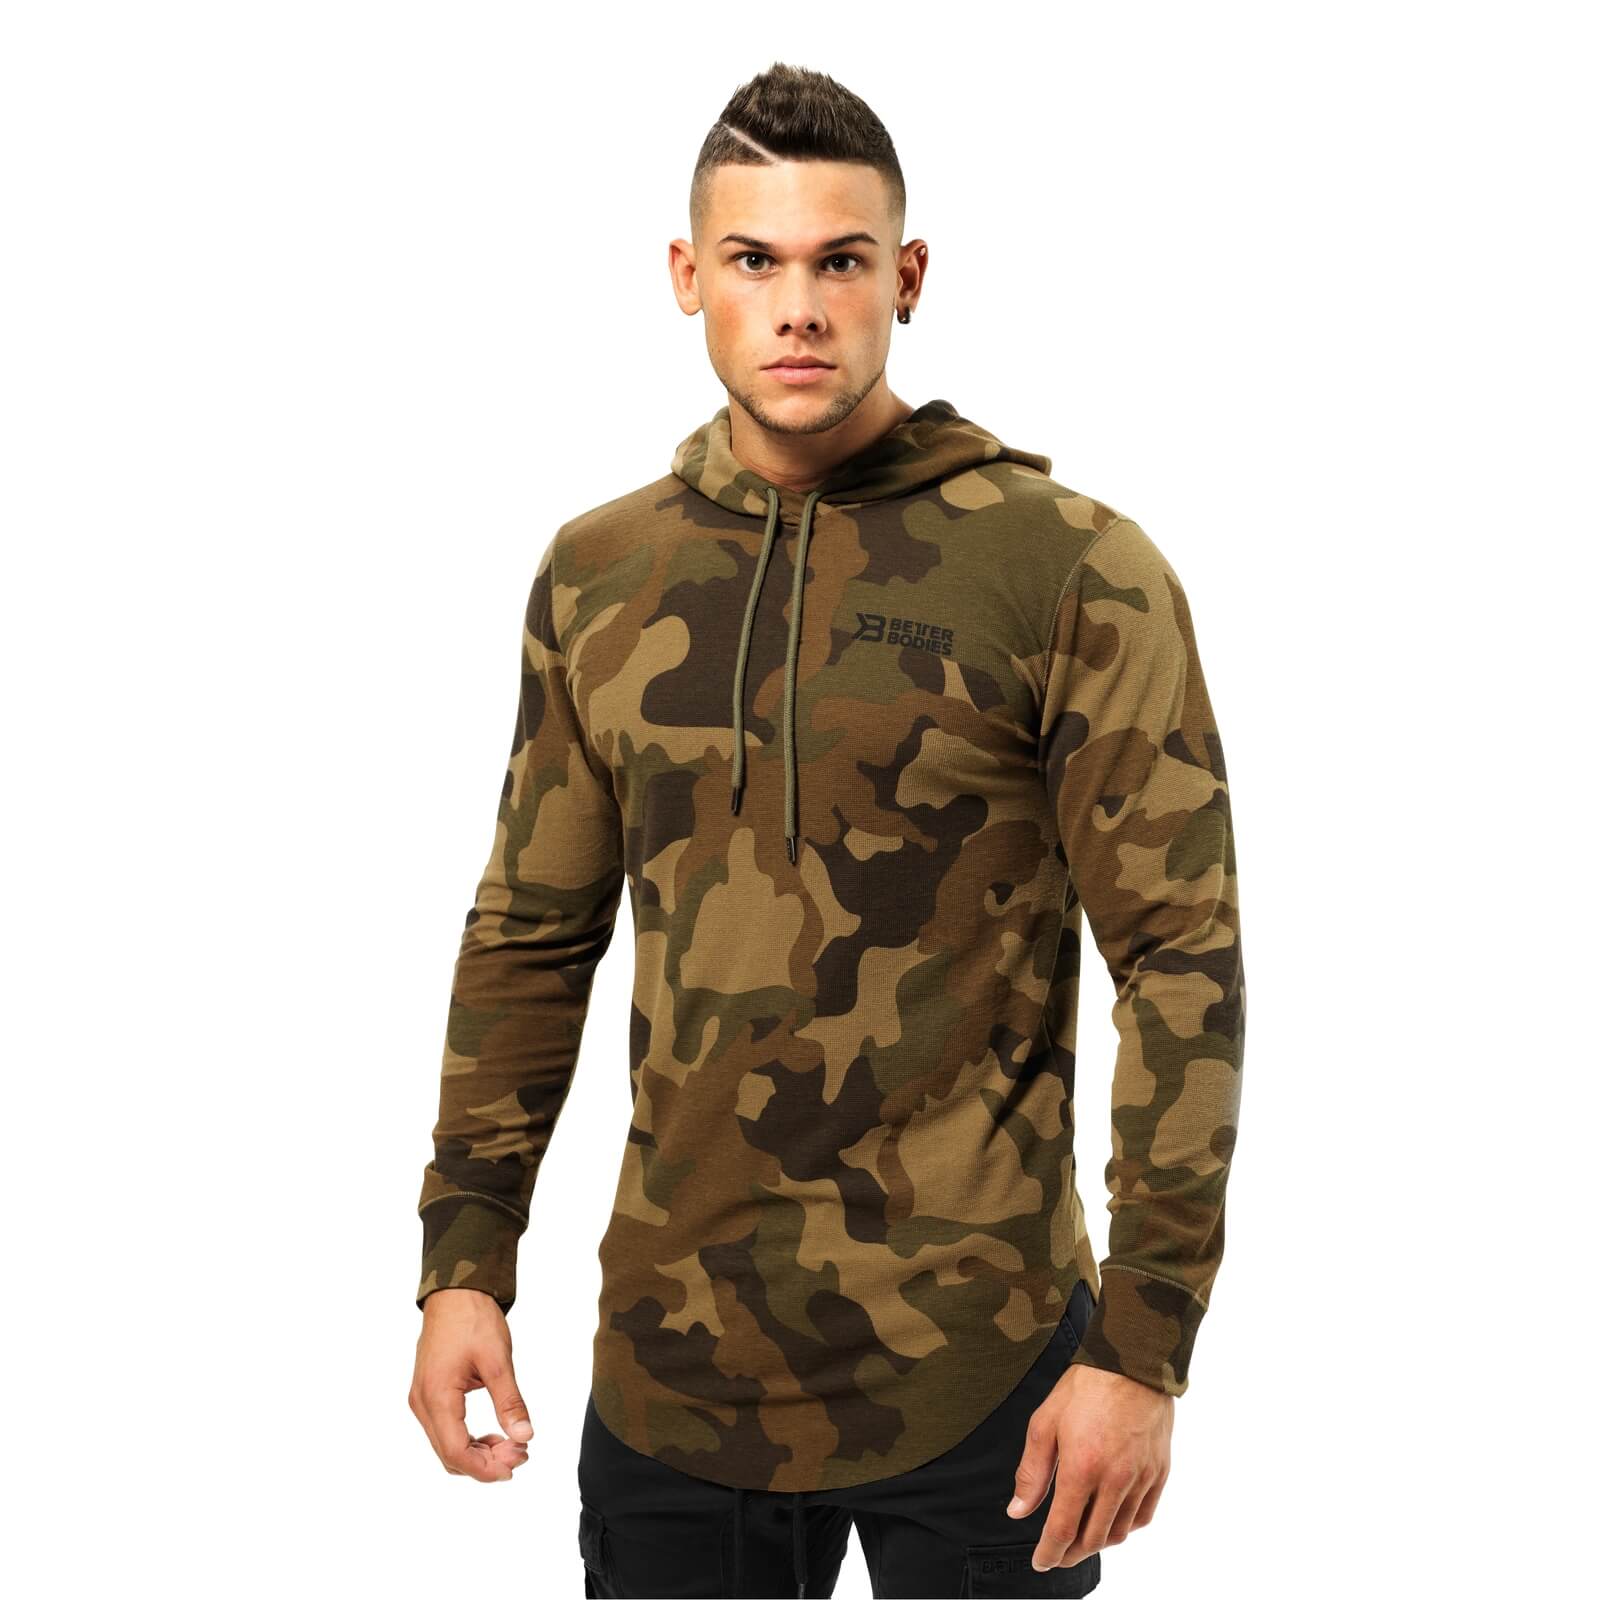 Stanton Thermal Hood, military camo, Better Bodies